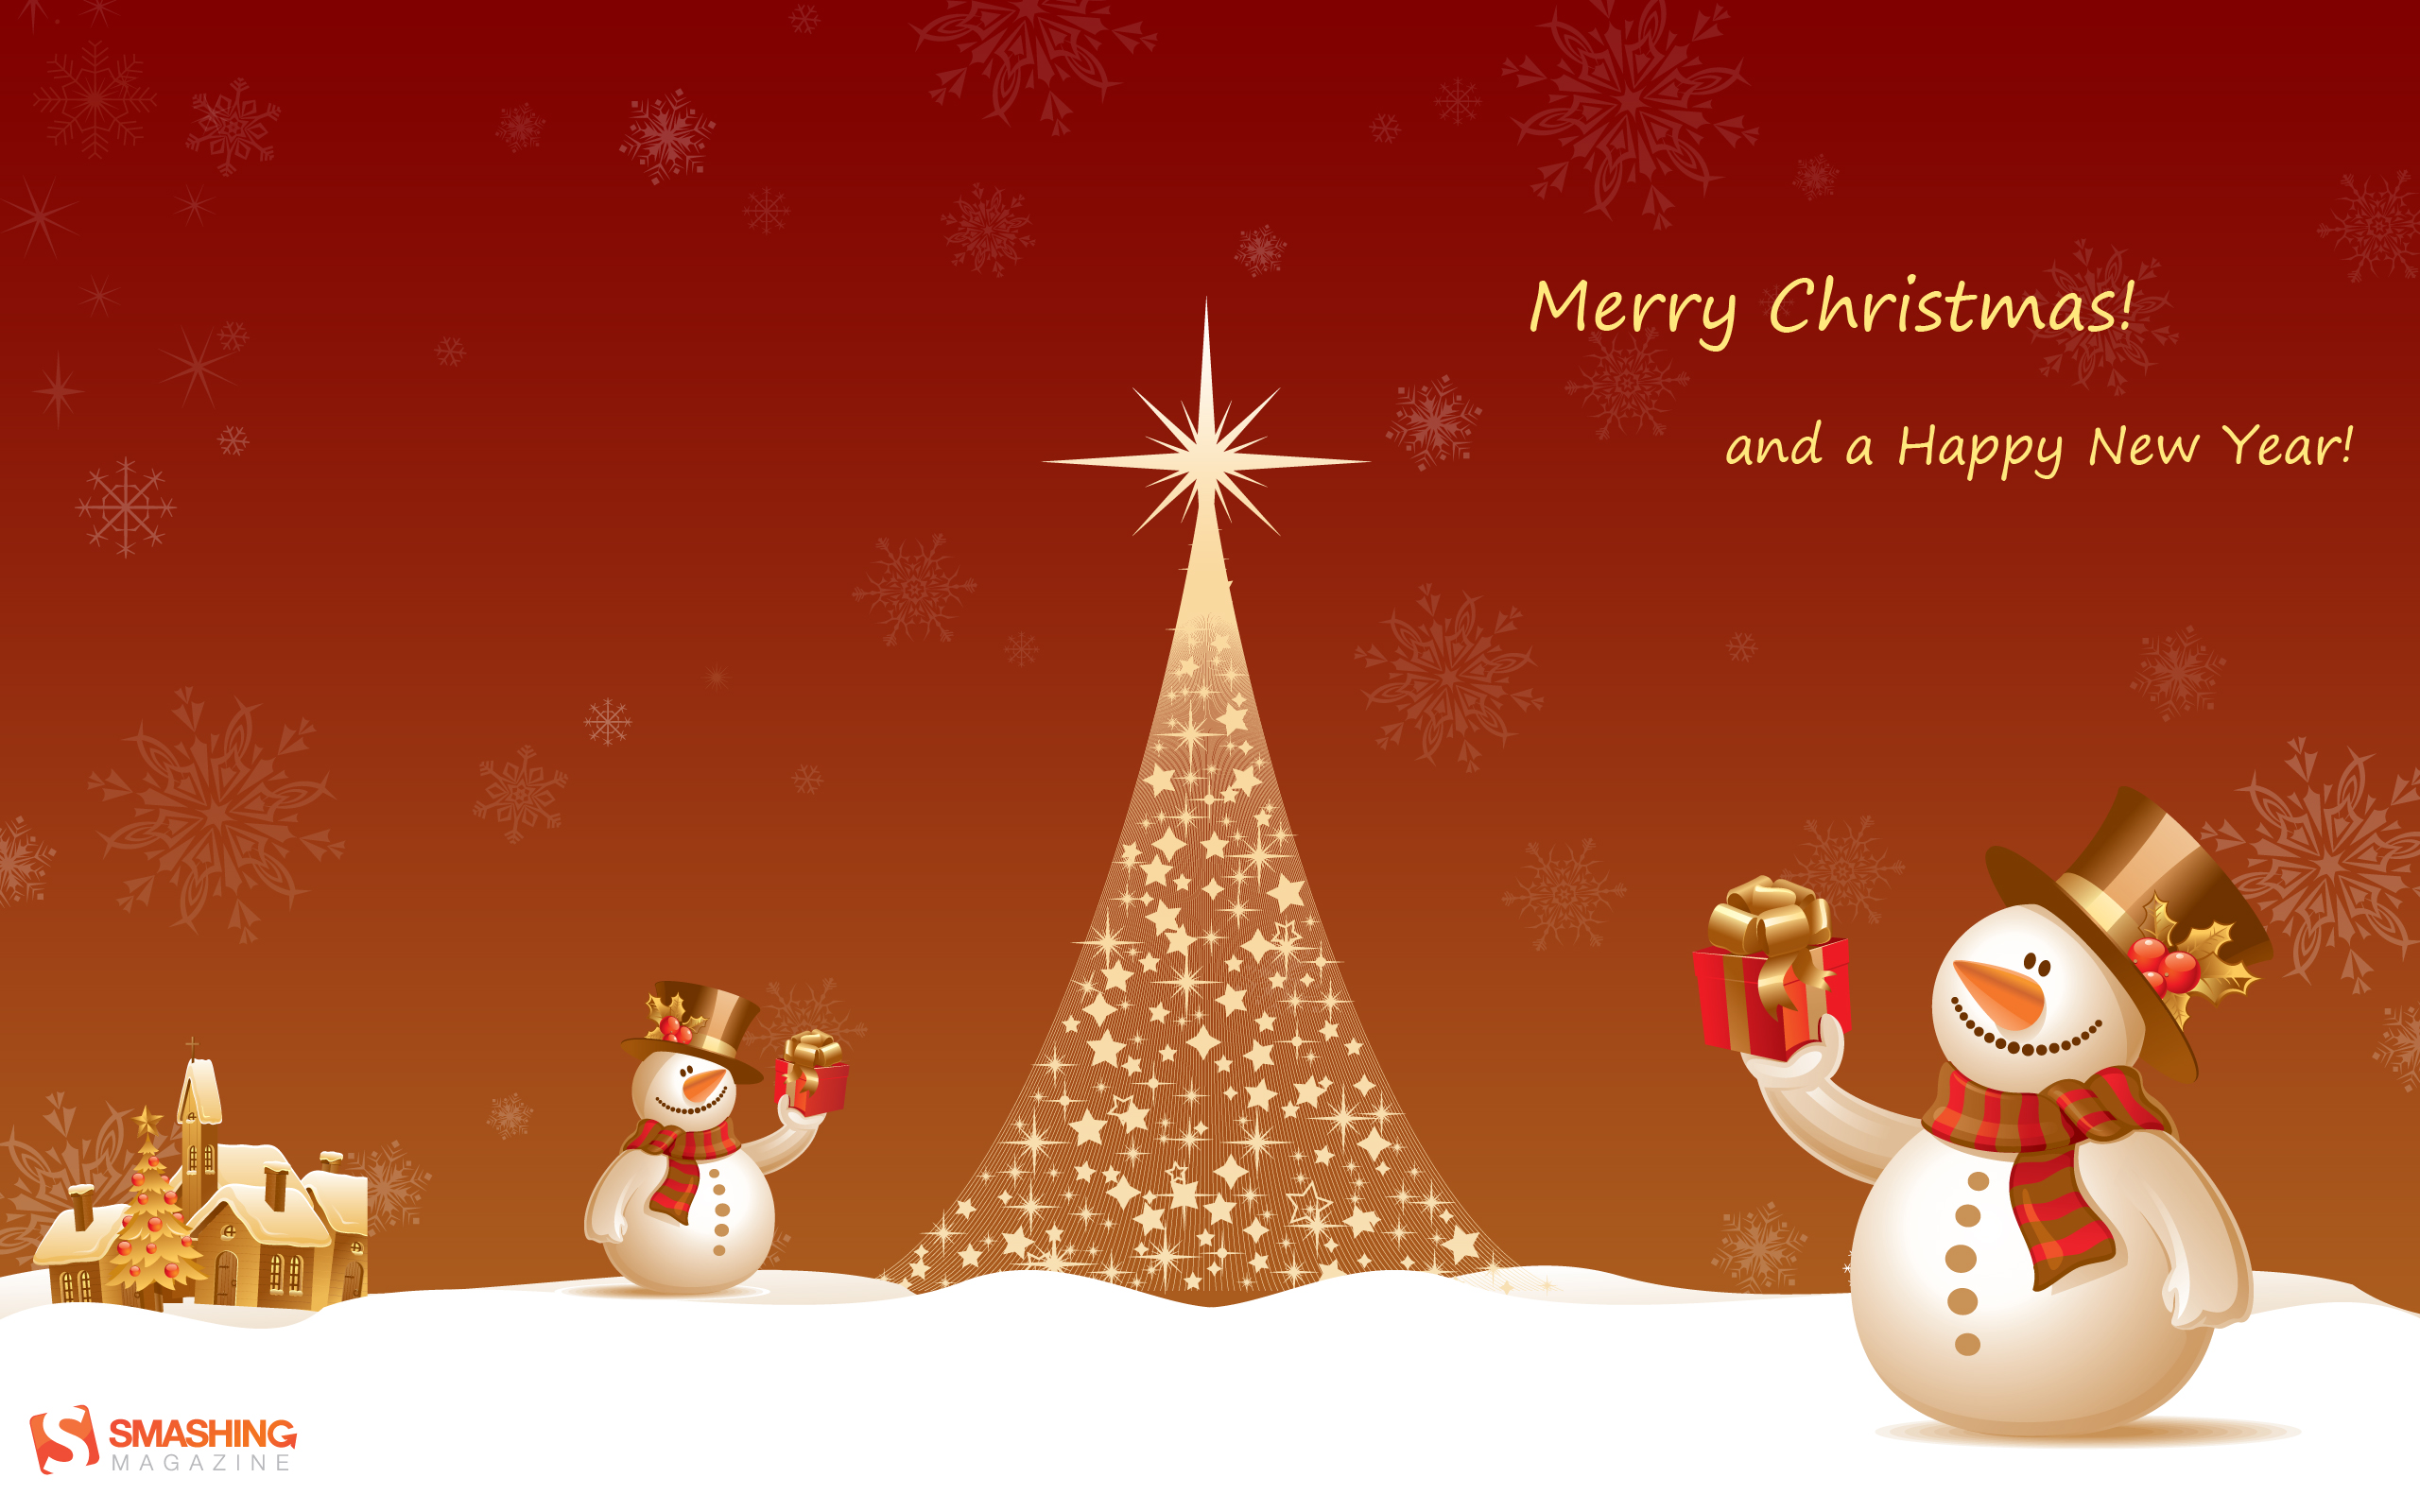 Merry Christmas And Happy New Year 2015!!